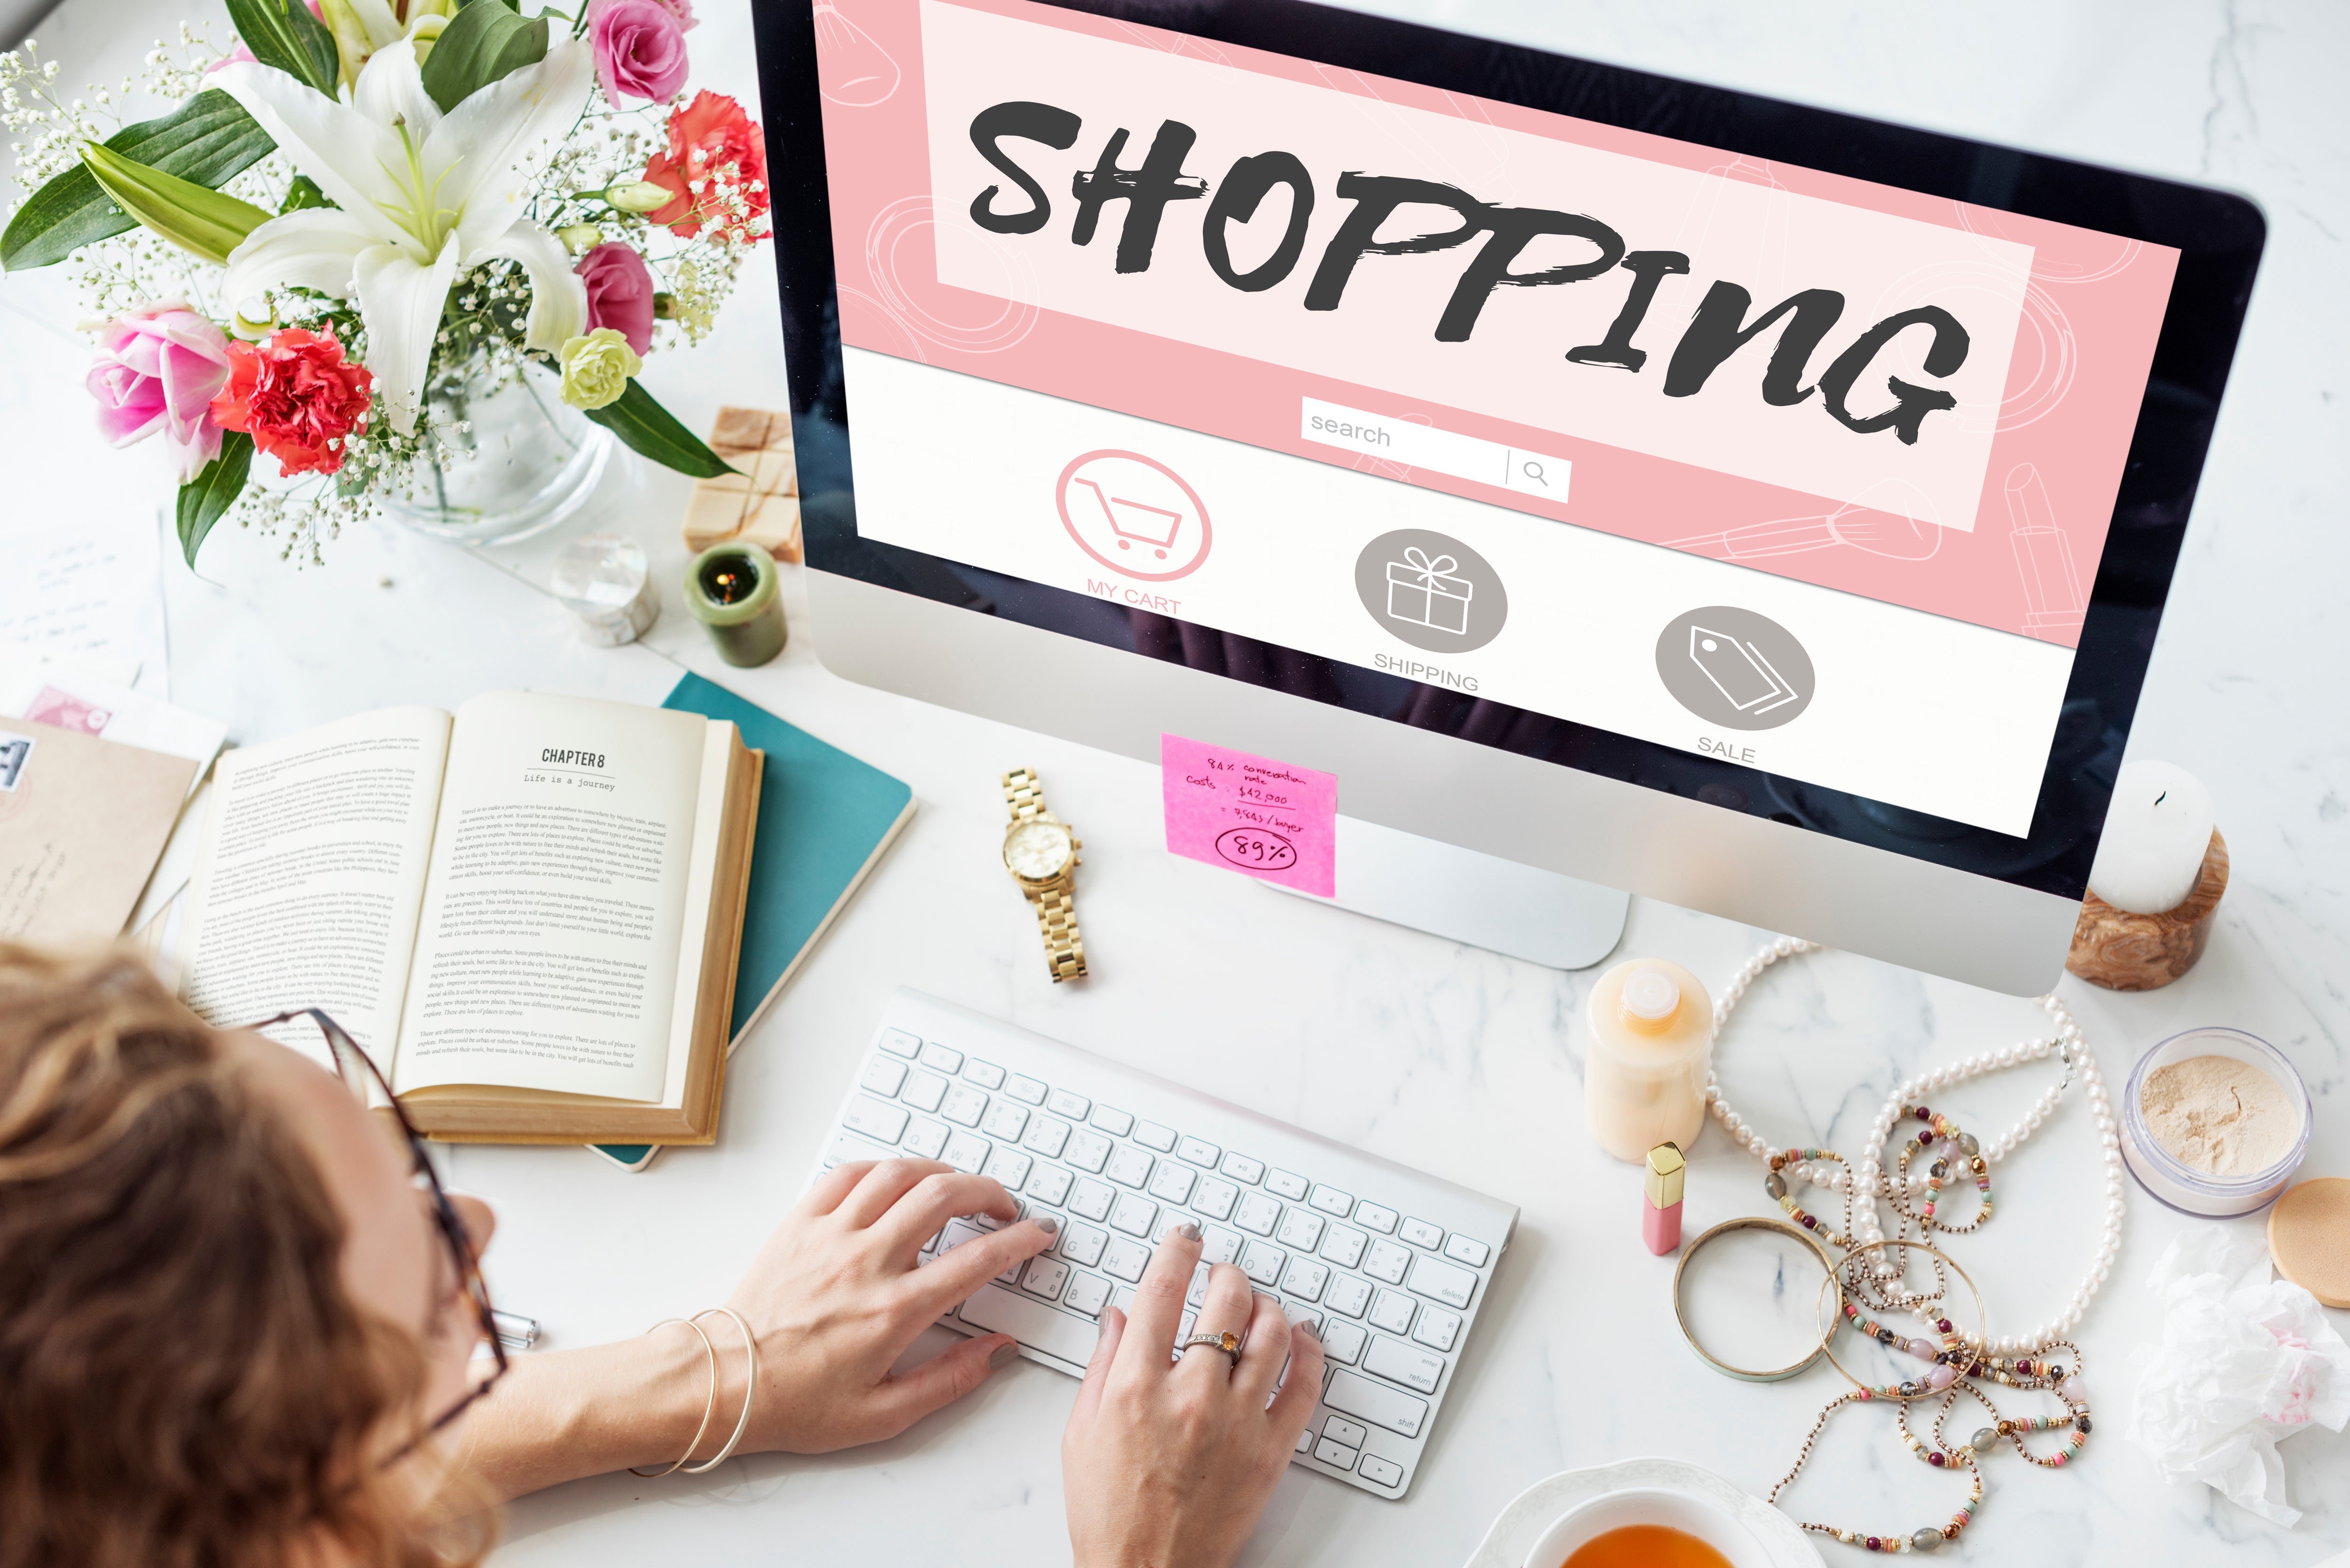 Using Shopify To Run A Successful Online Store.